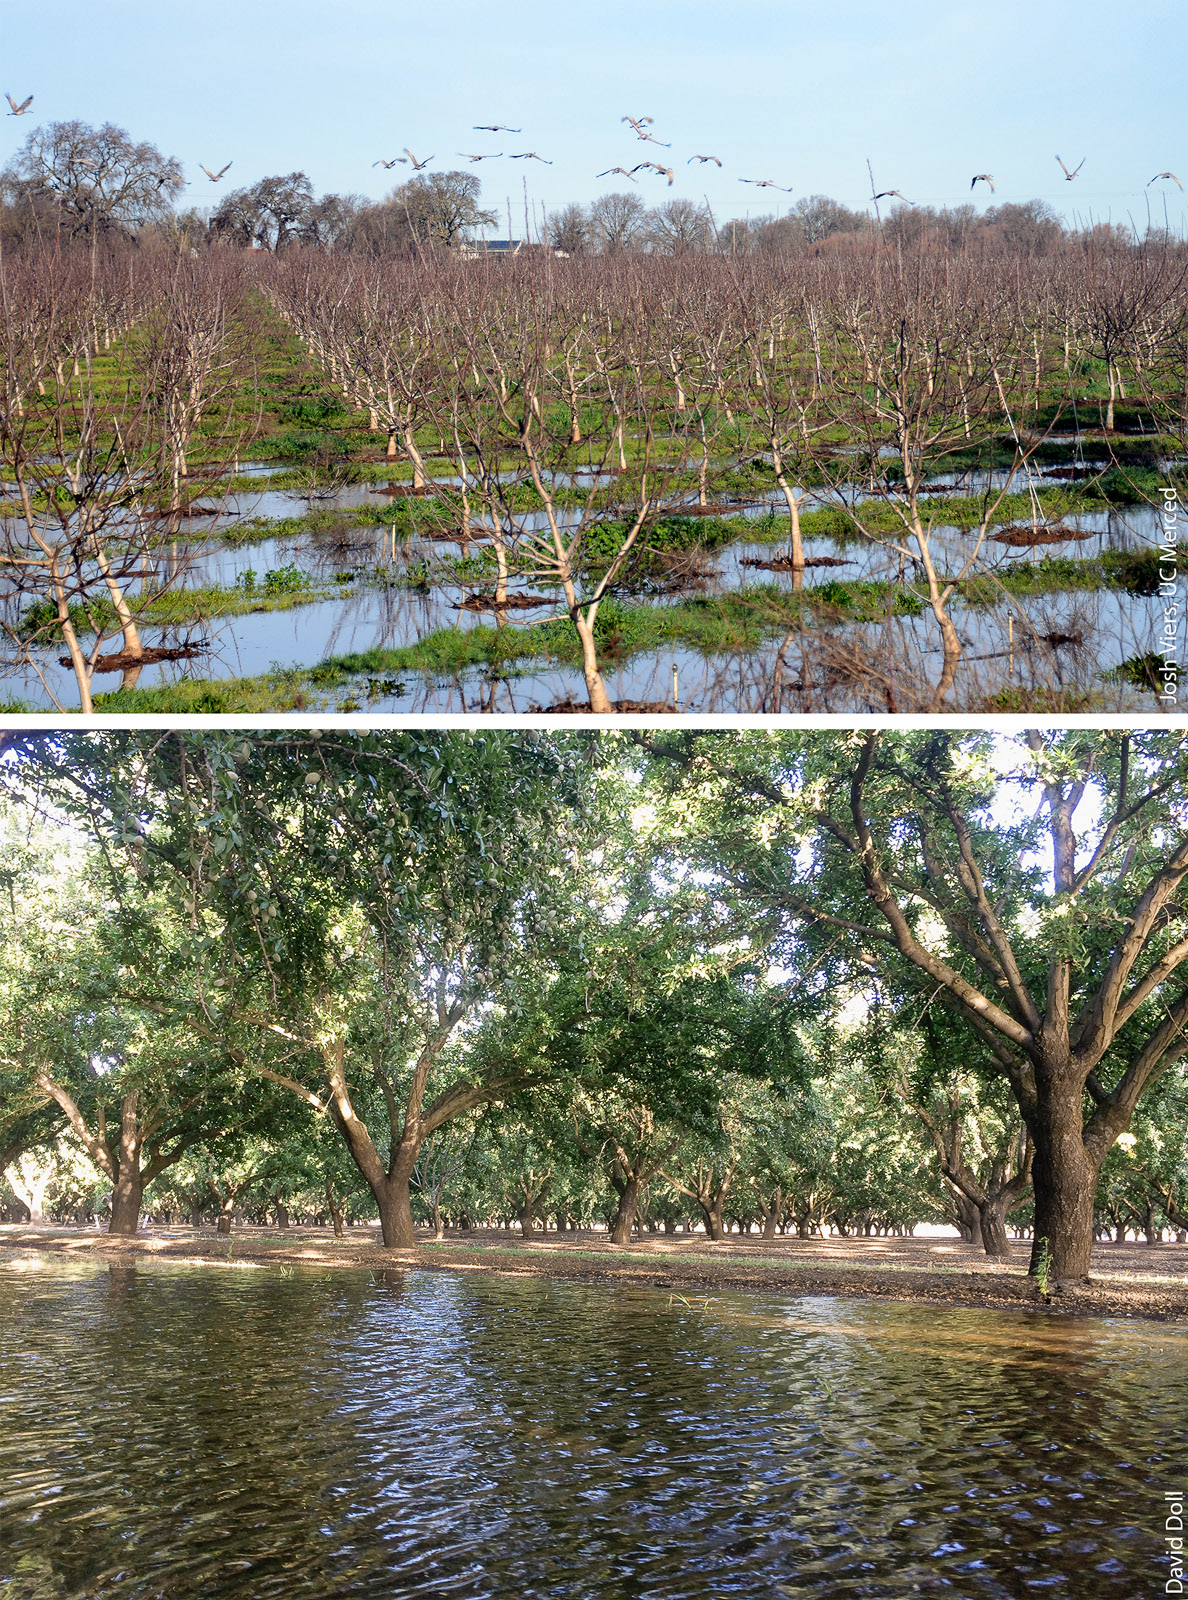 Orchards of walnuts (above) and almonds (below) may be viable sites for groundwater recharge, though the potential for water damage to such high-value crops adds risk.